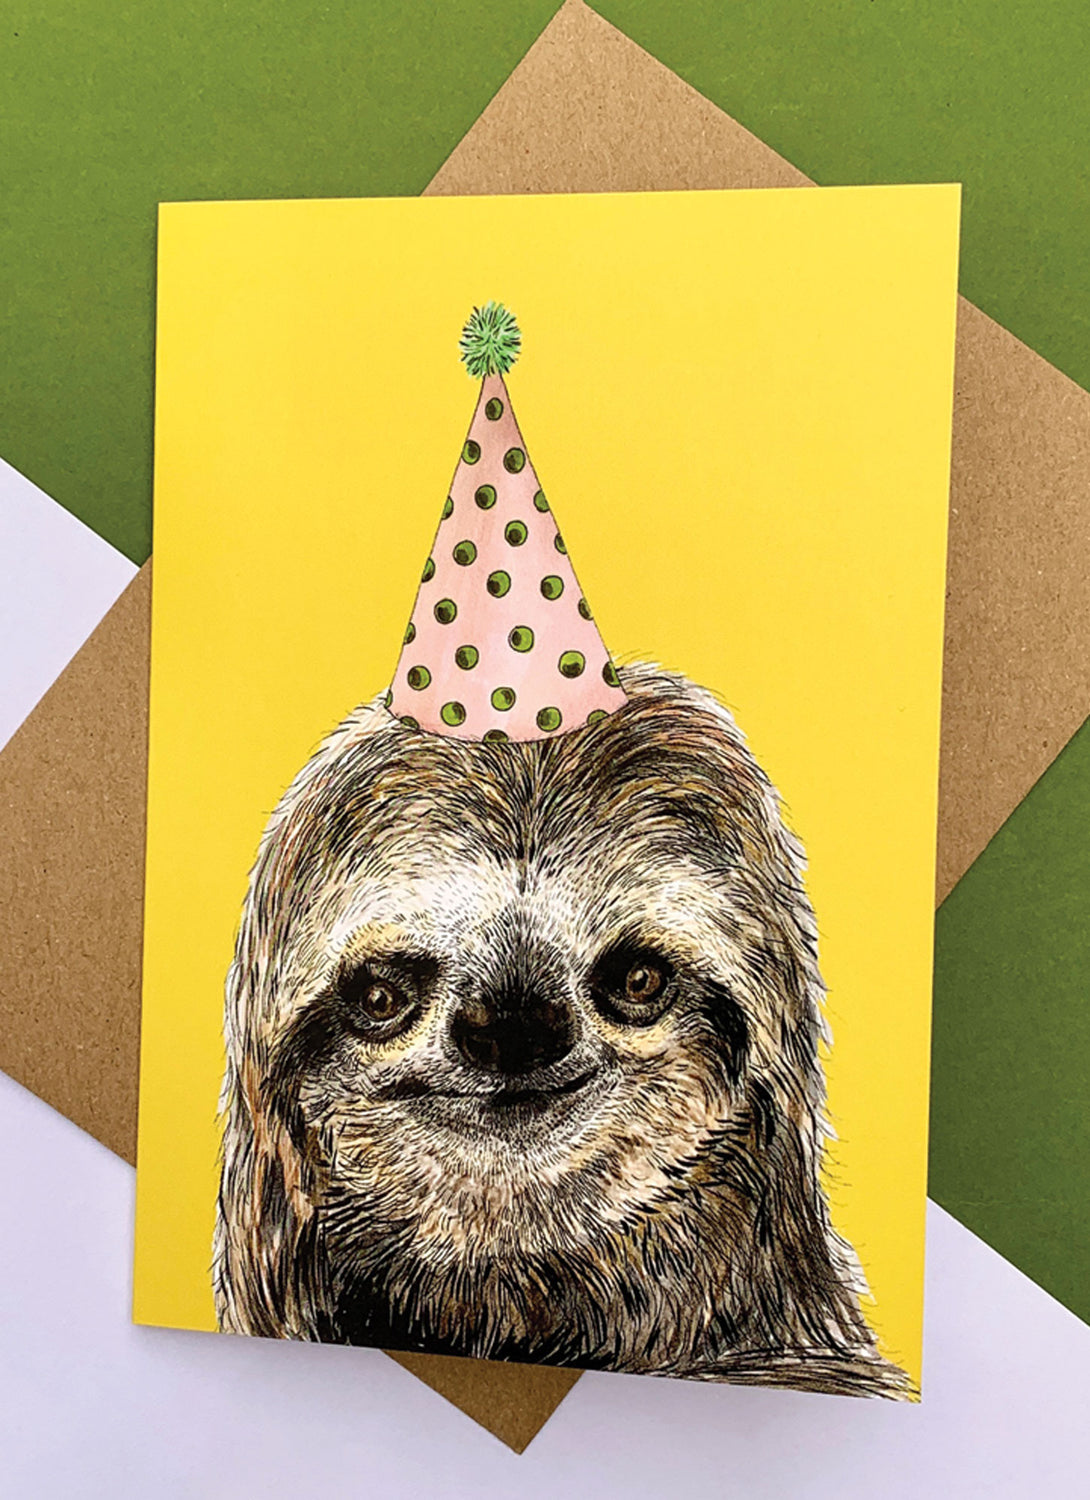 Sloth Party Hat Yellow